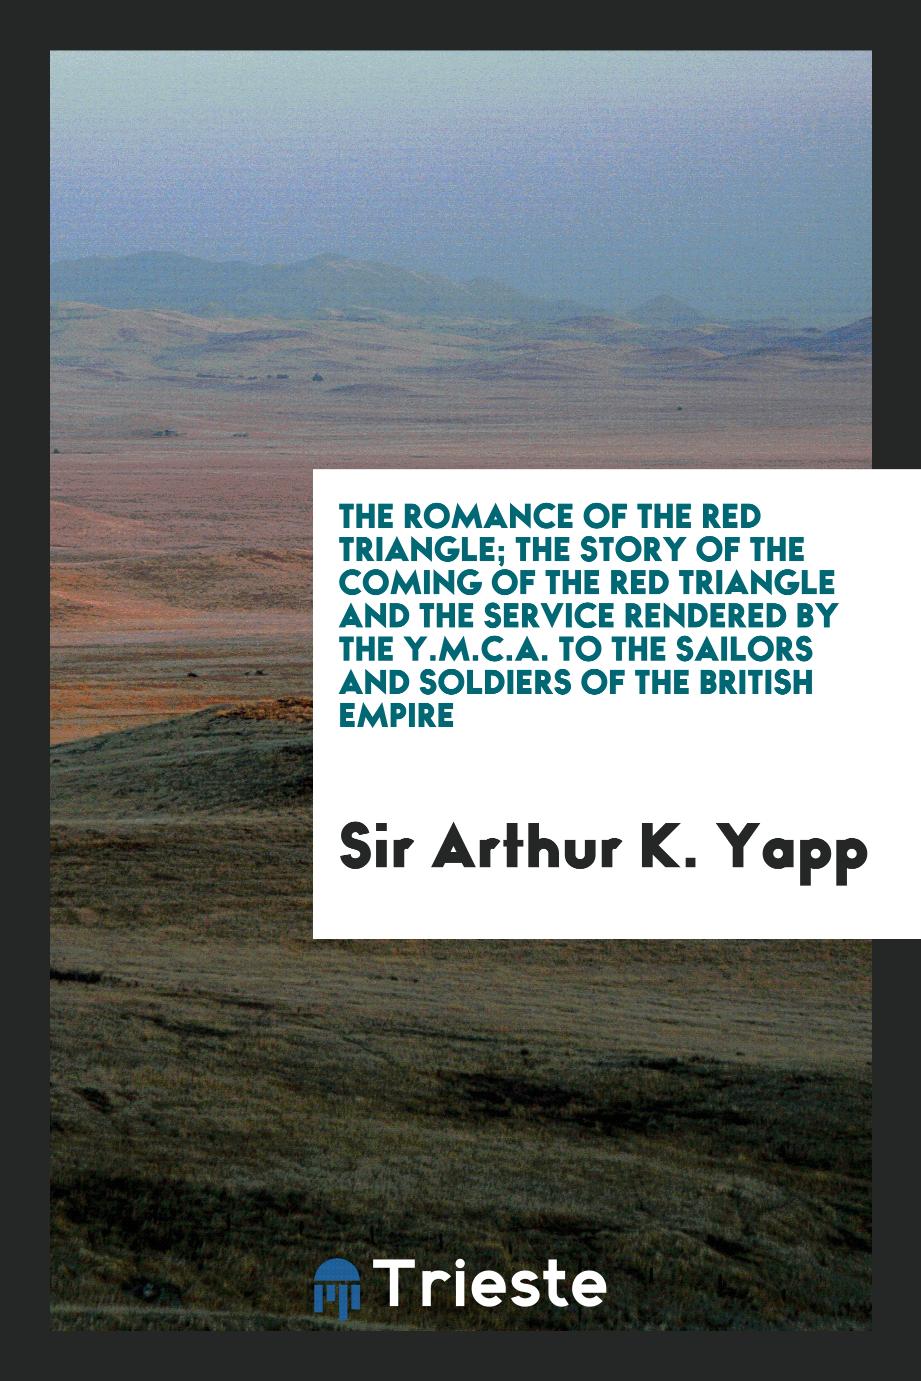 The romance of the red triangle; the story of the coming of the red triangle and the service rendered by the Y.M.C.A. to the sailors and soldiers of the British empire